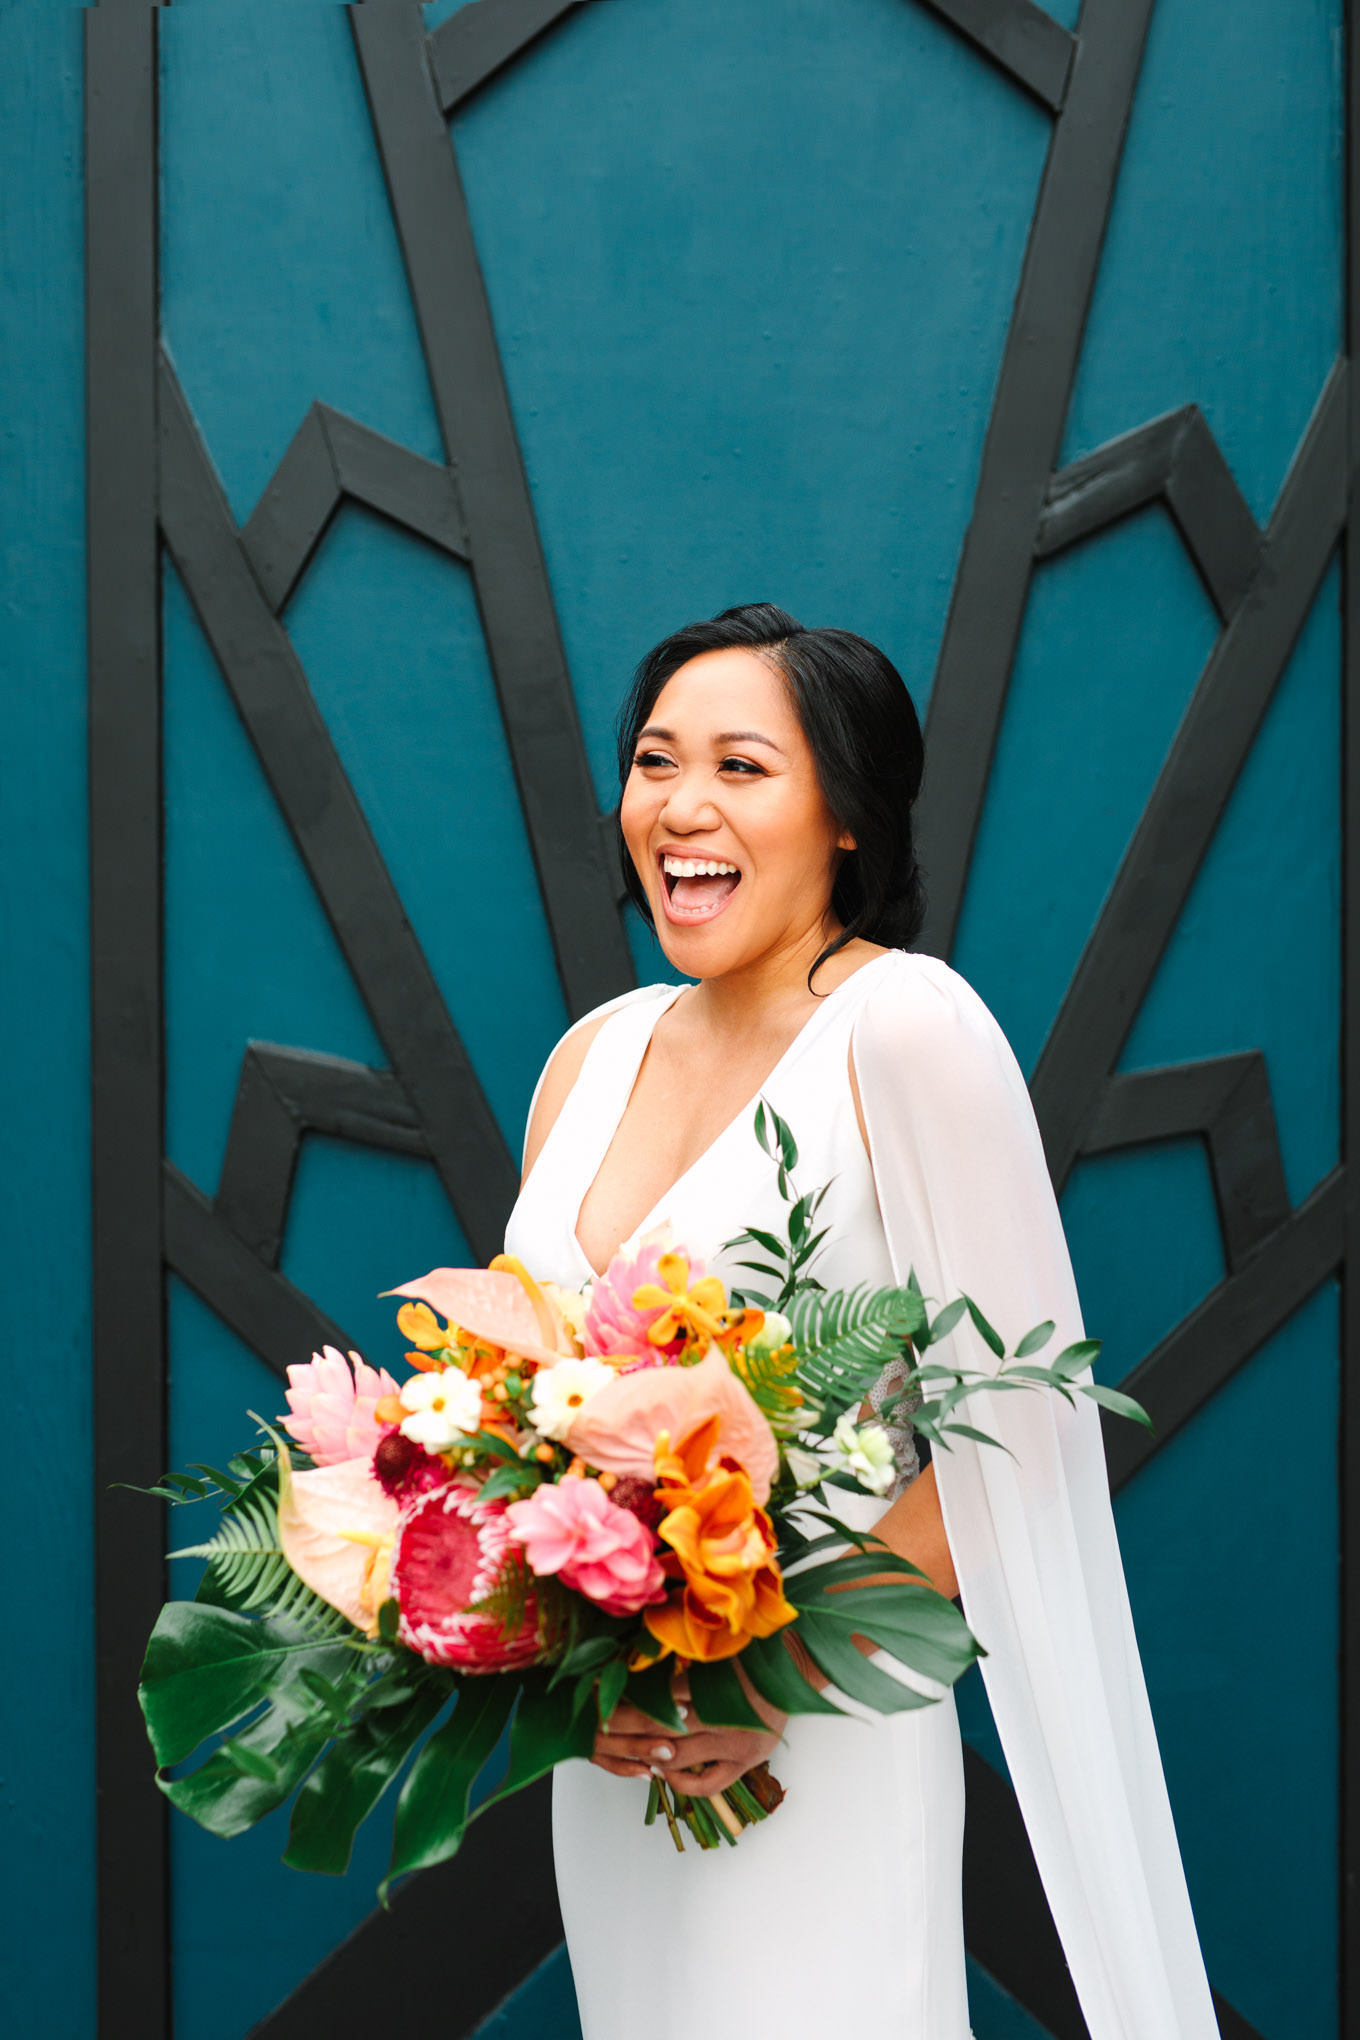 Bride laughing in front of teal geometric wall | TV inspired wedding at The Fig House Los Angeles | Published on The Knot | Fresh and colorful photography for fun-loving couples in Southern California | #losangeleswedding #TVwedding #colorfulwedding #theknot   Source: Mary Costa Photography | Los Angeles wedding photographer